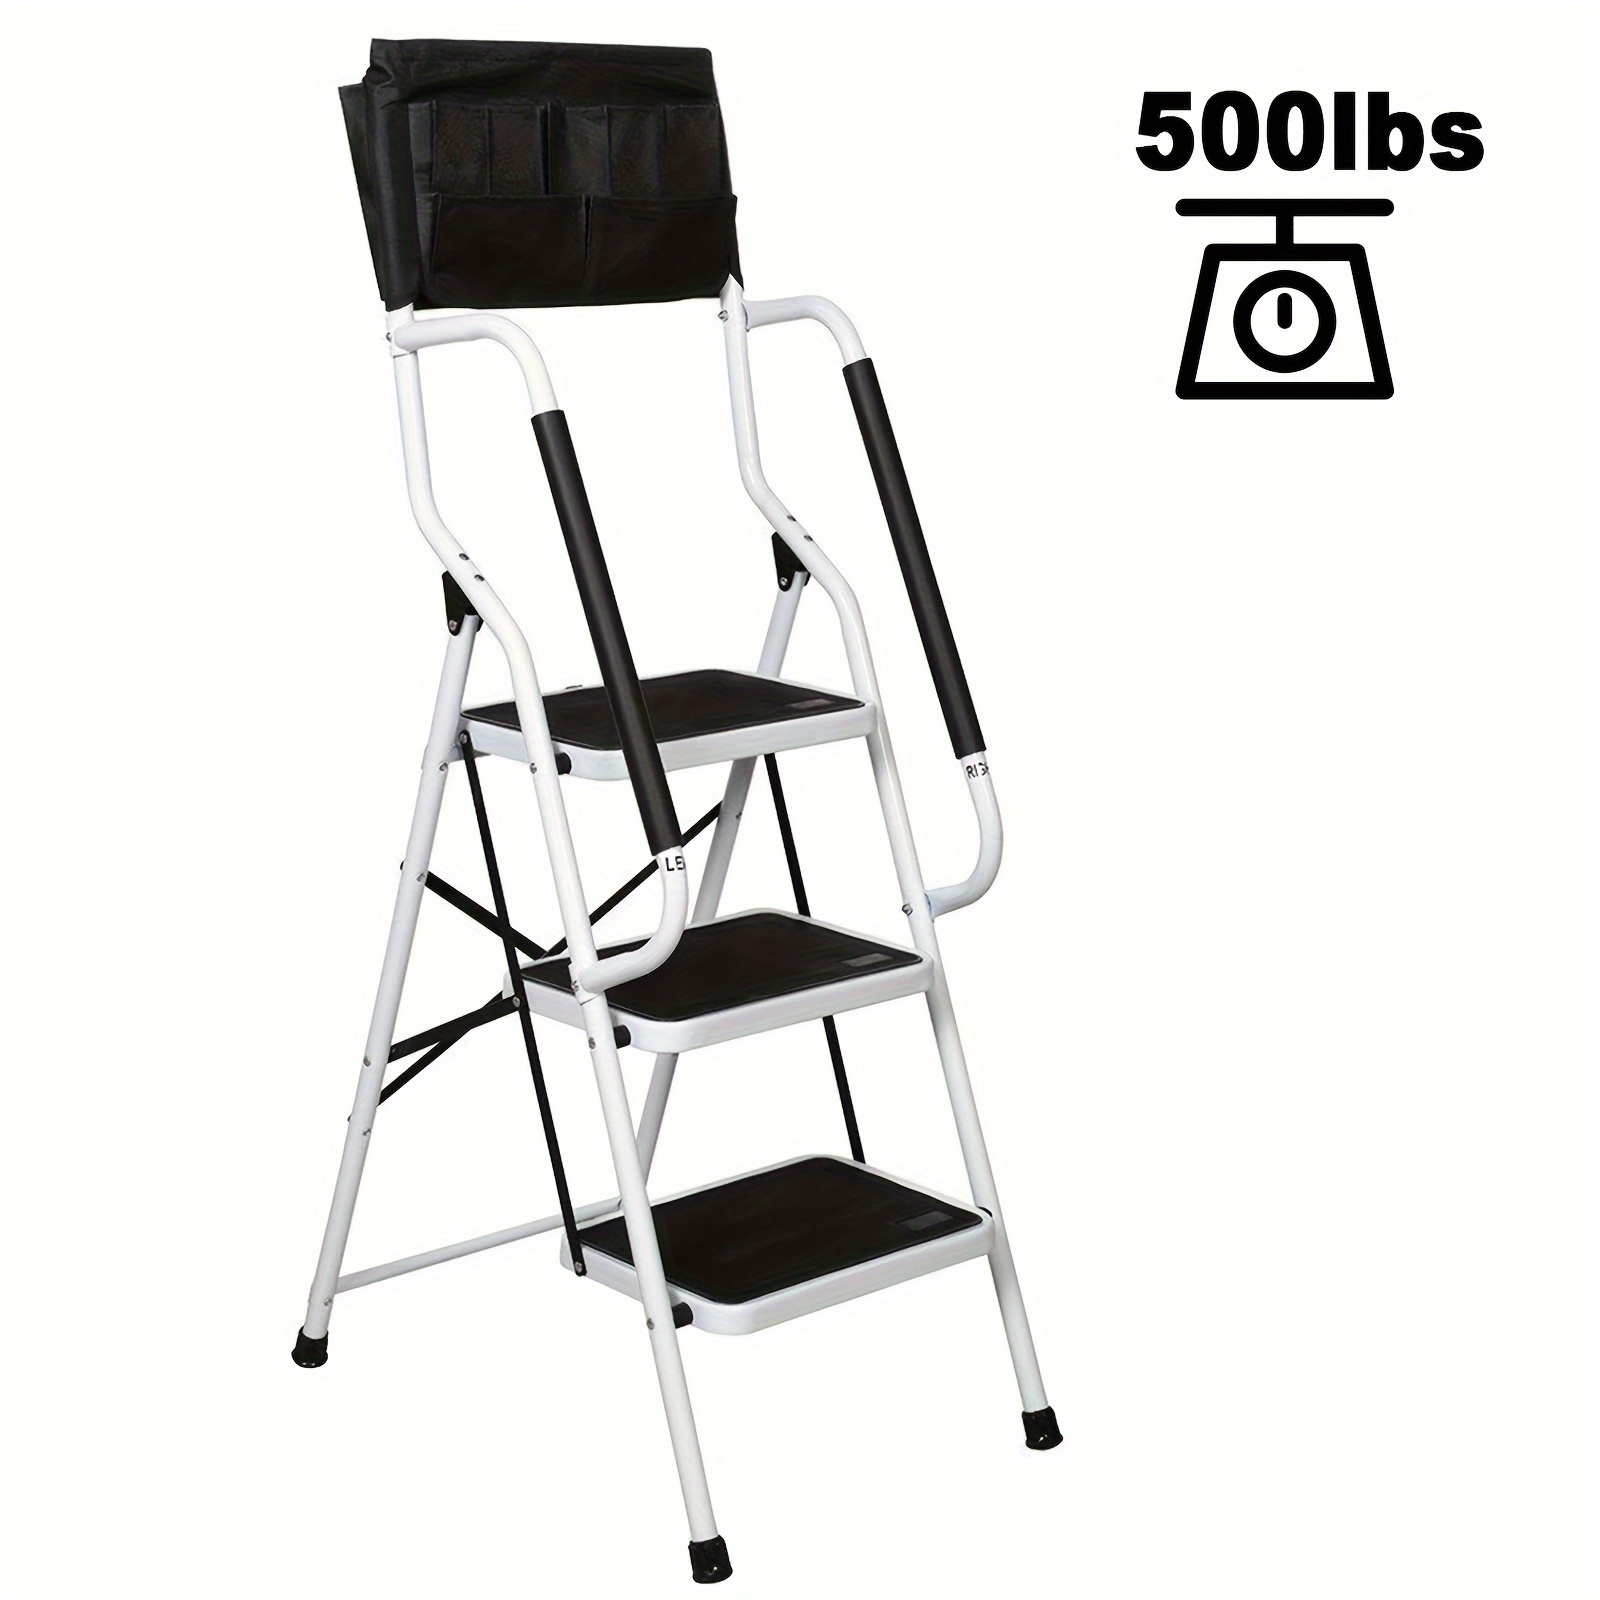 

Step Ladder With Handrails 500 Lb Capacity Step Stool Folding Portable Ladders For Home Kitchen Steel Frame With Non-slip Wide Pedal With Attachable Tool Bag